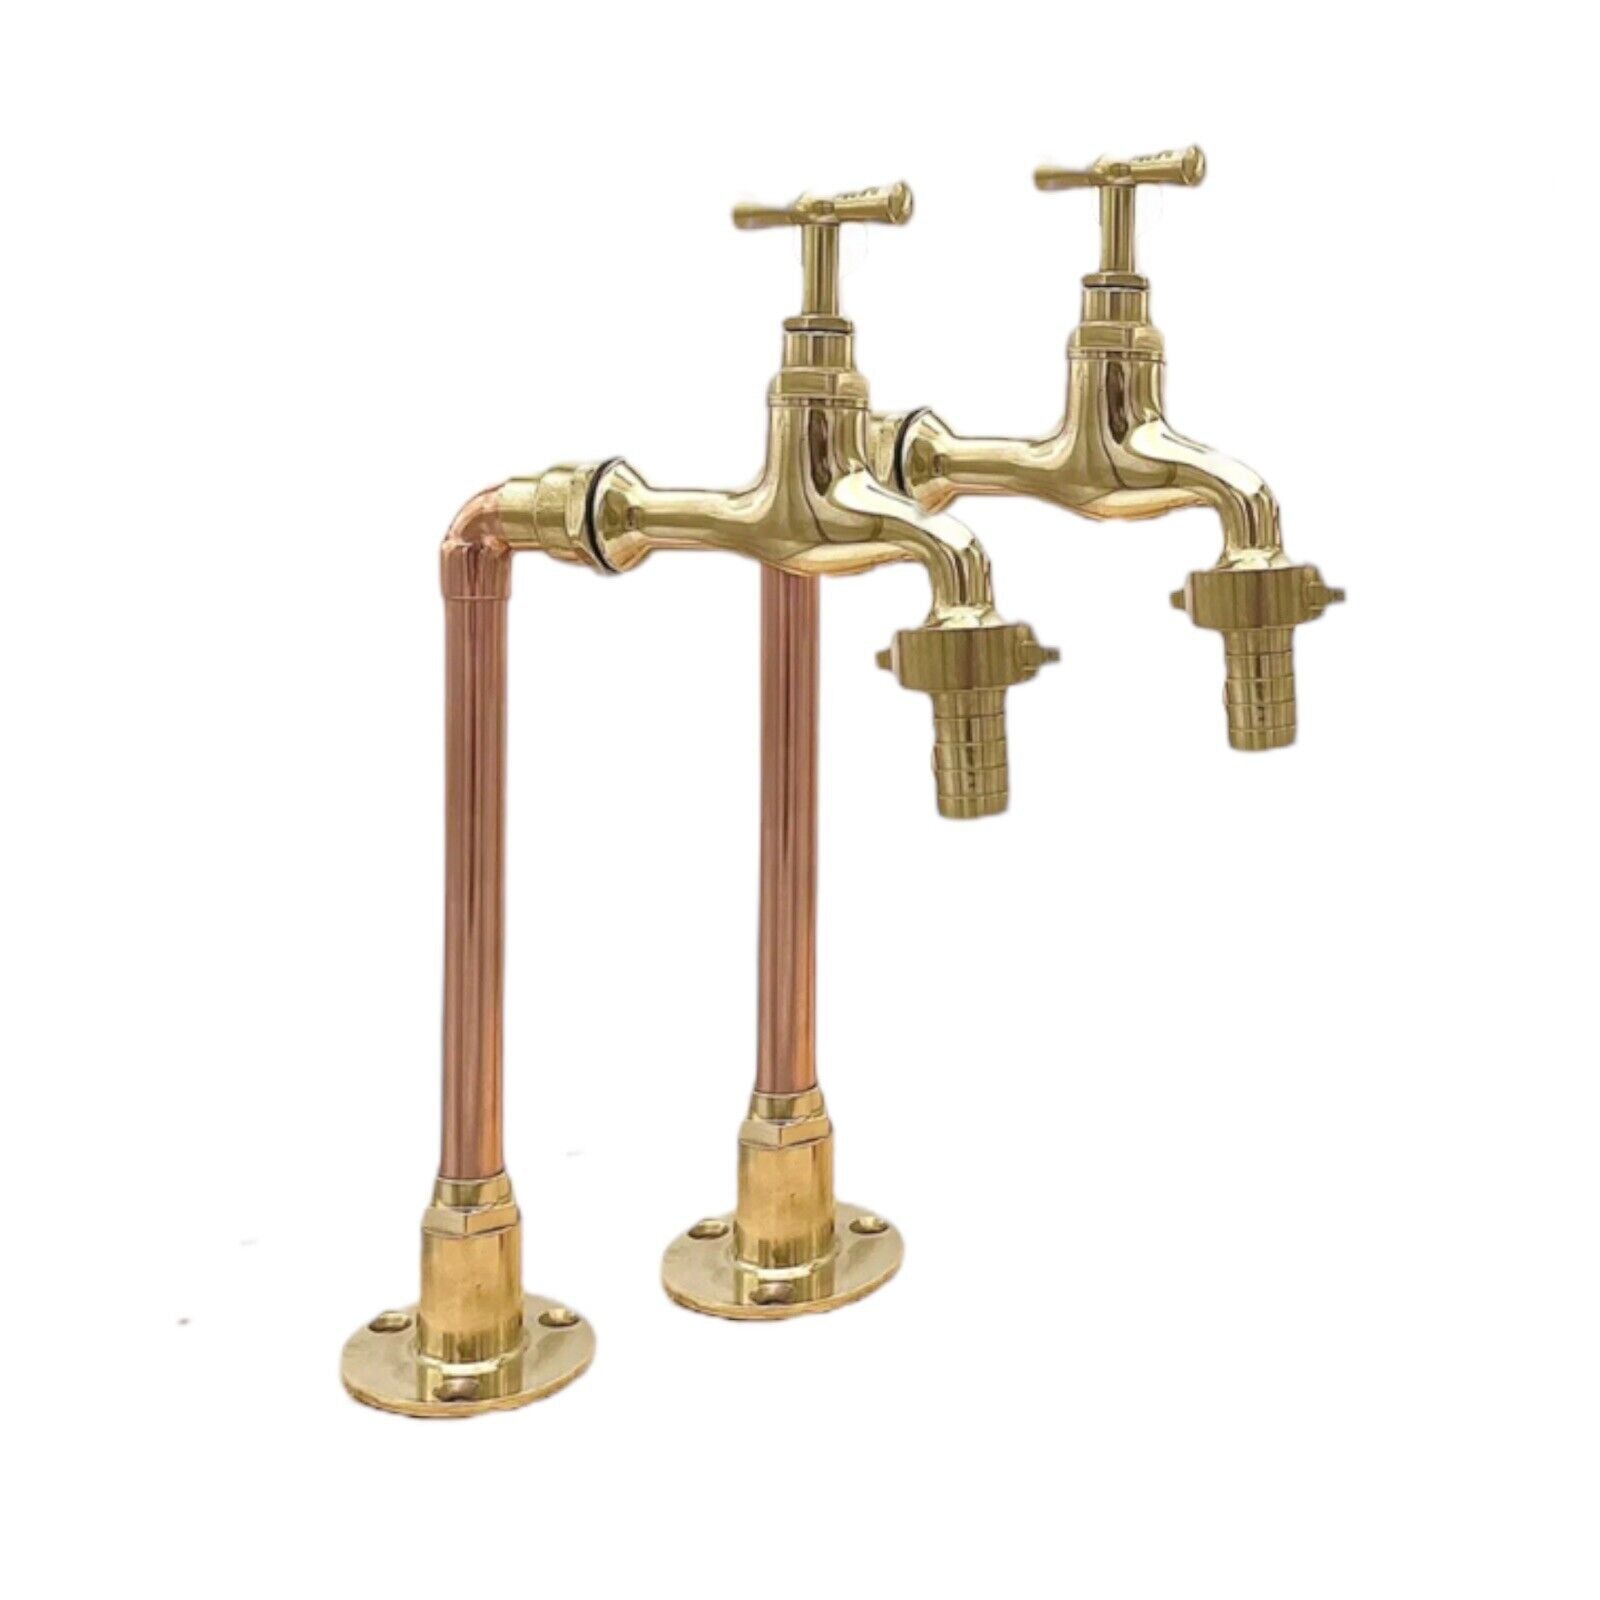 Copper and brass pillar kitchen taps sold by All Things French Store